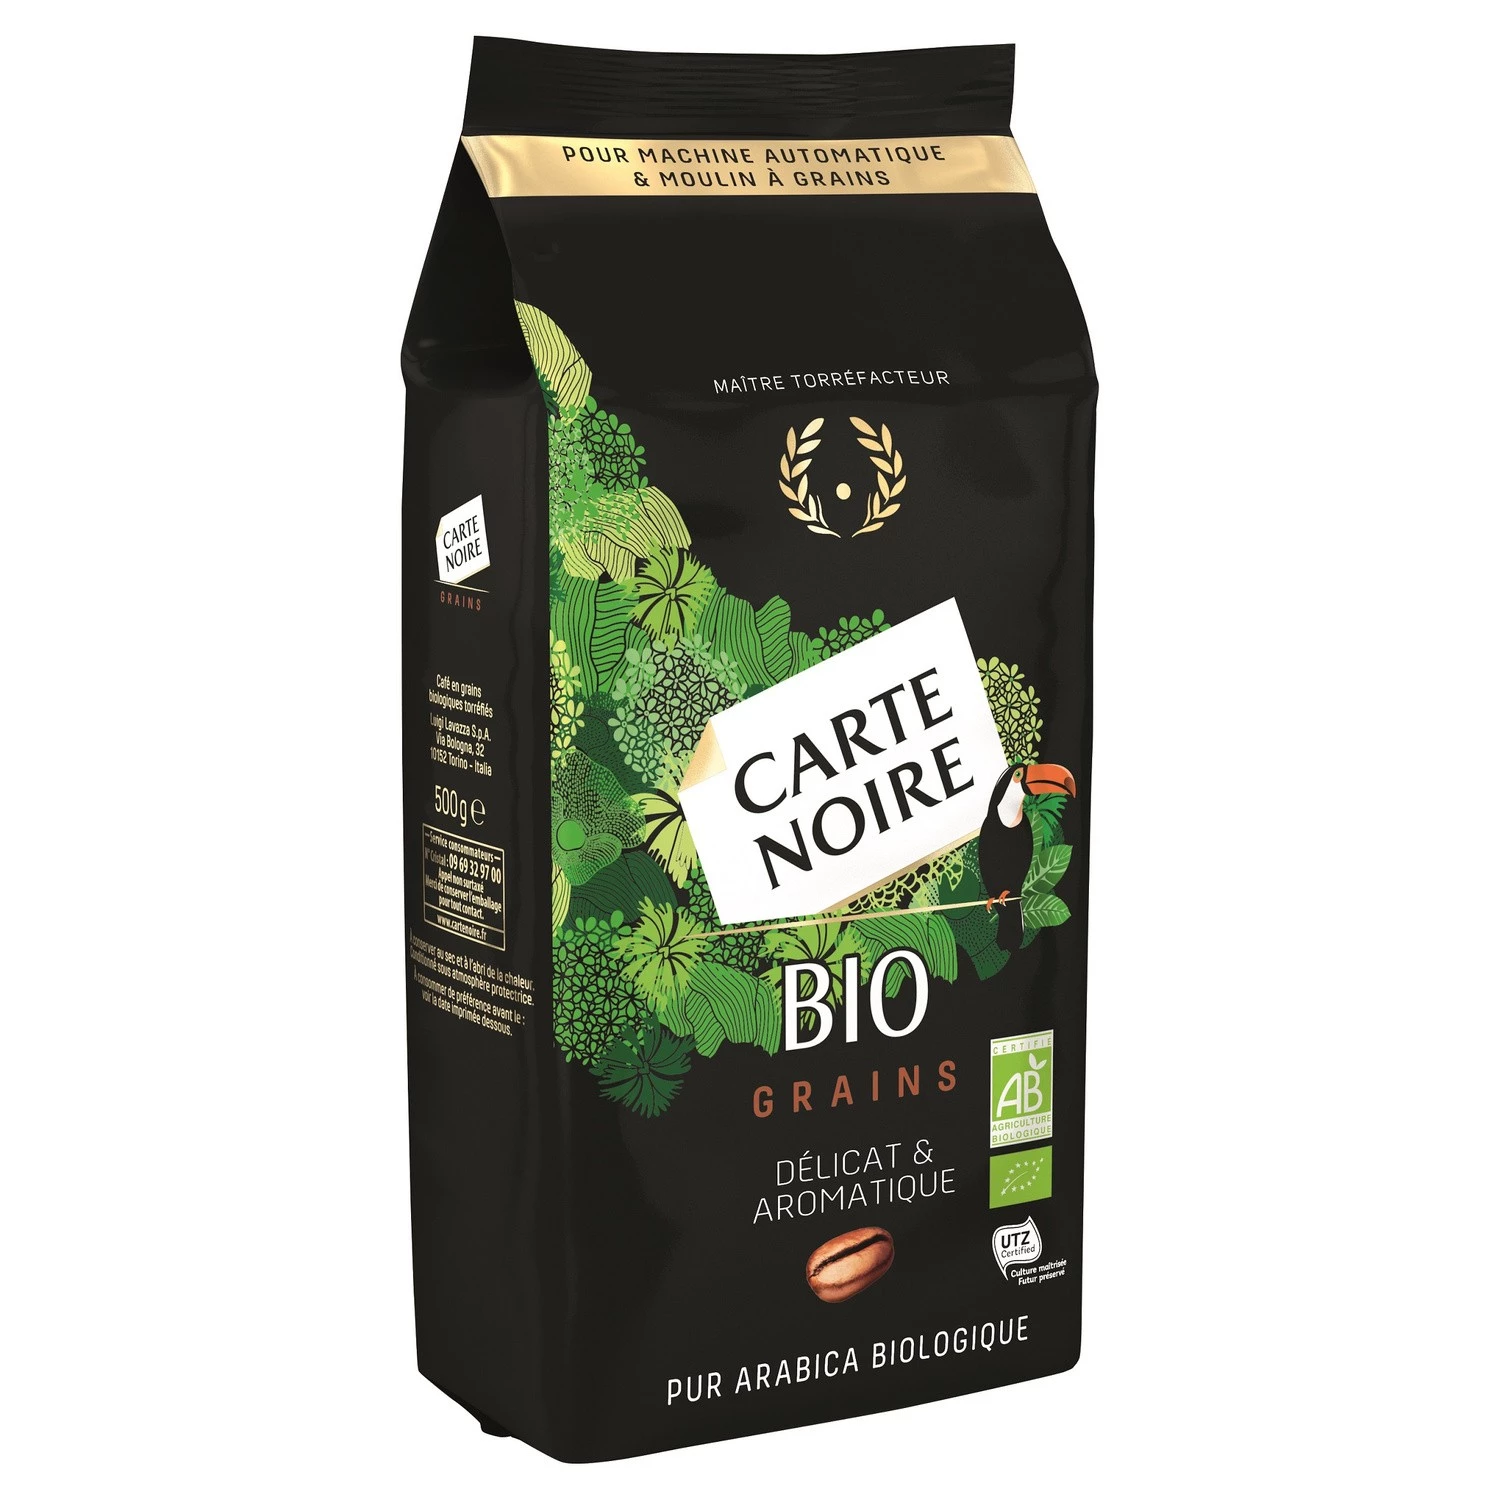 Delicate & aromatic organic coffee beans 500g - CARTE NOIRE